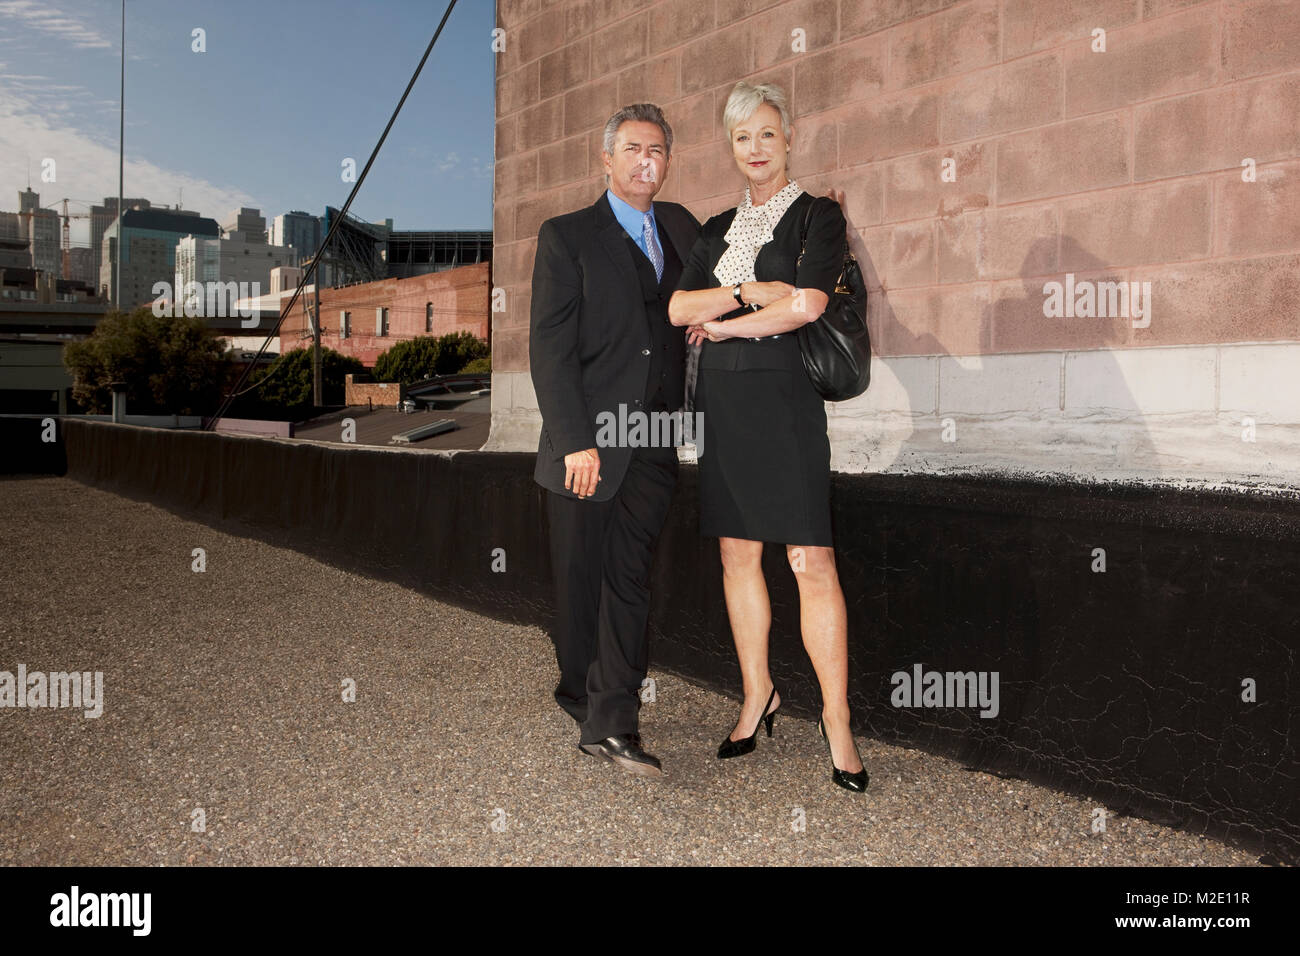 Portrait of confident business people standing near brick wall Stock Photo